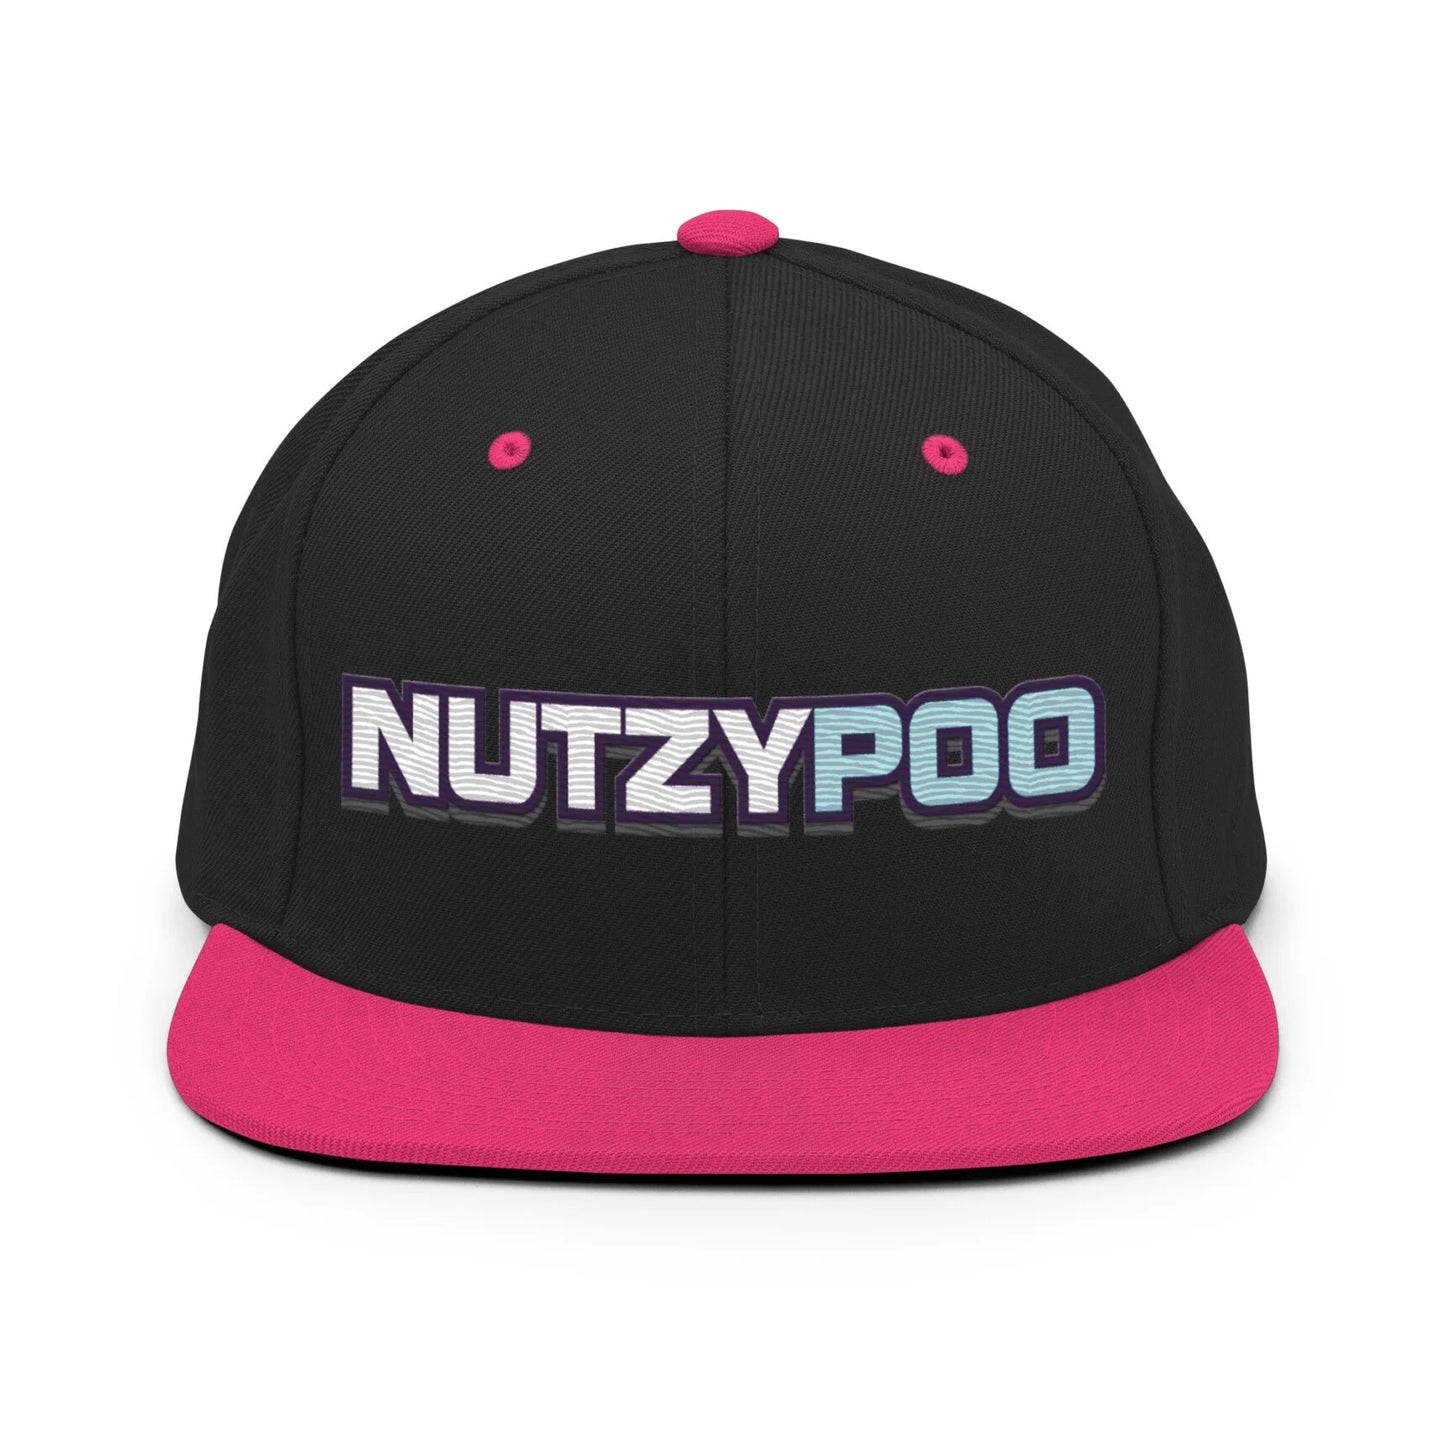 NutzyPoo ShowZone hat in black with hot pink brim and accents